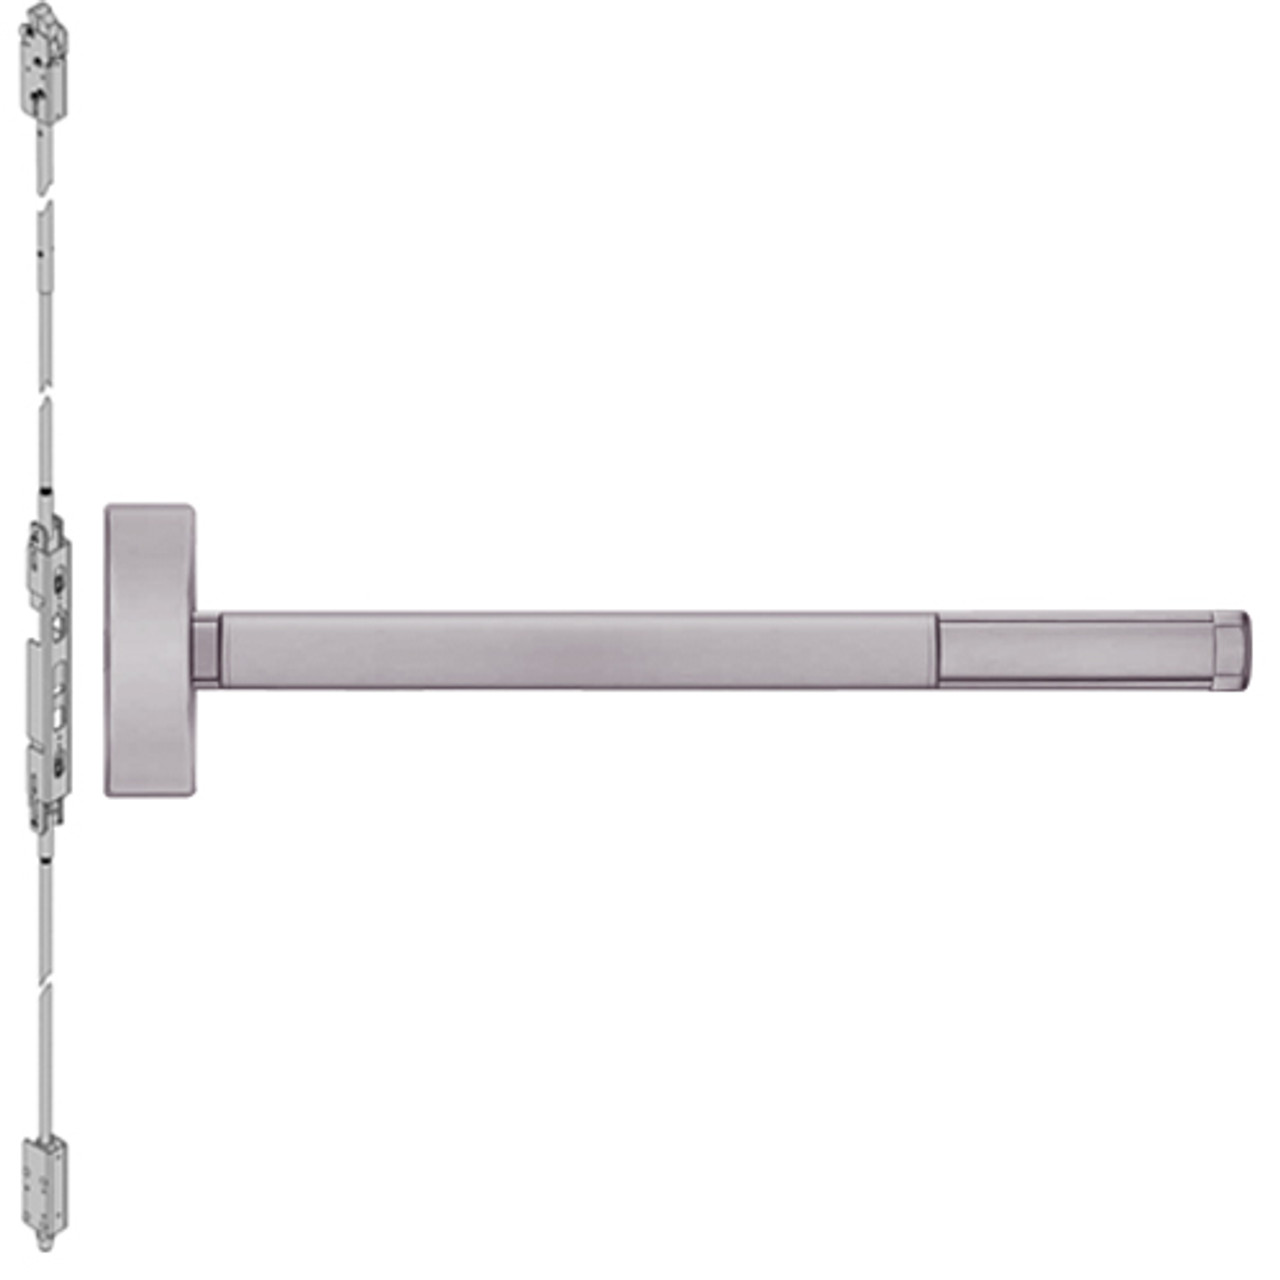 ELR2808-630-48 PHI 2800 Series Concealed Vertical Rod Exit Device with Electric Latch Retraction Prepped for Key Controls Lever-Knob in Satin Stainless Steel Finish